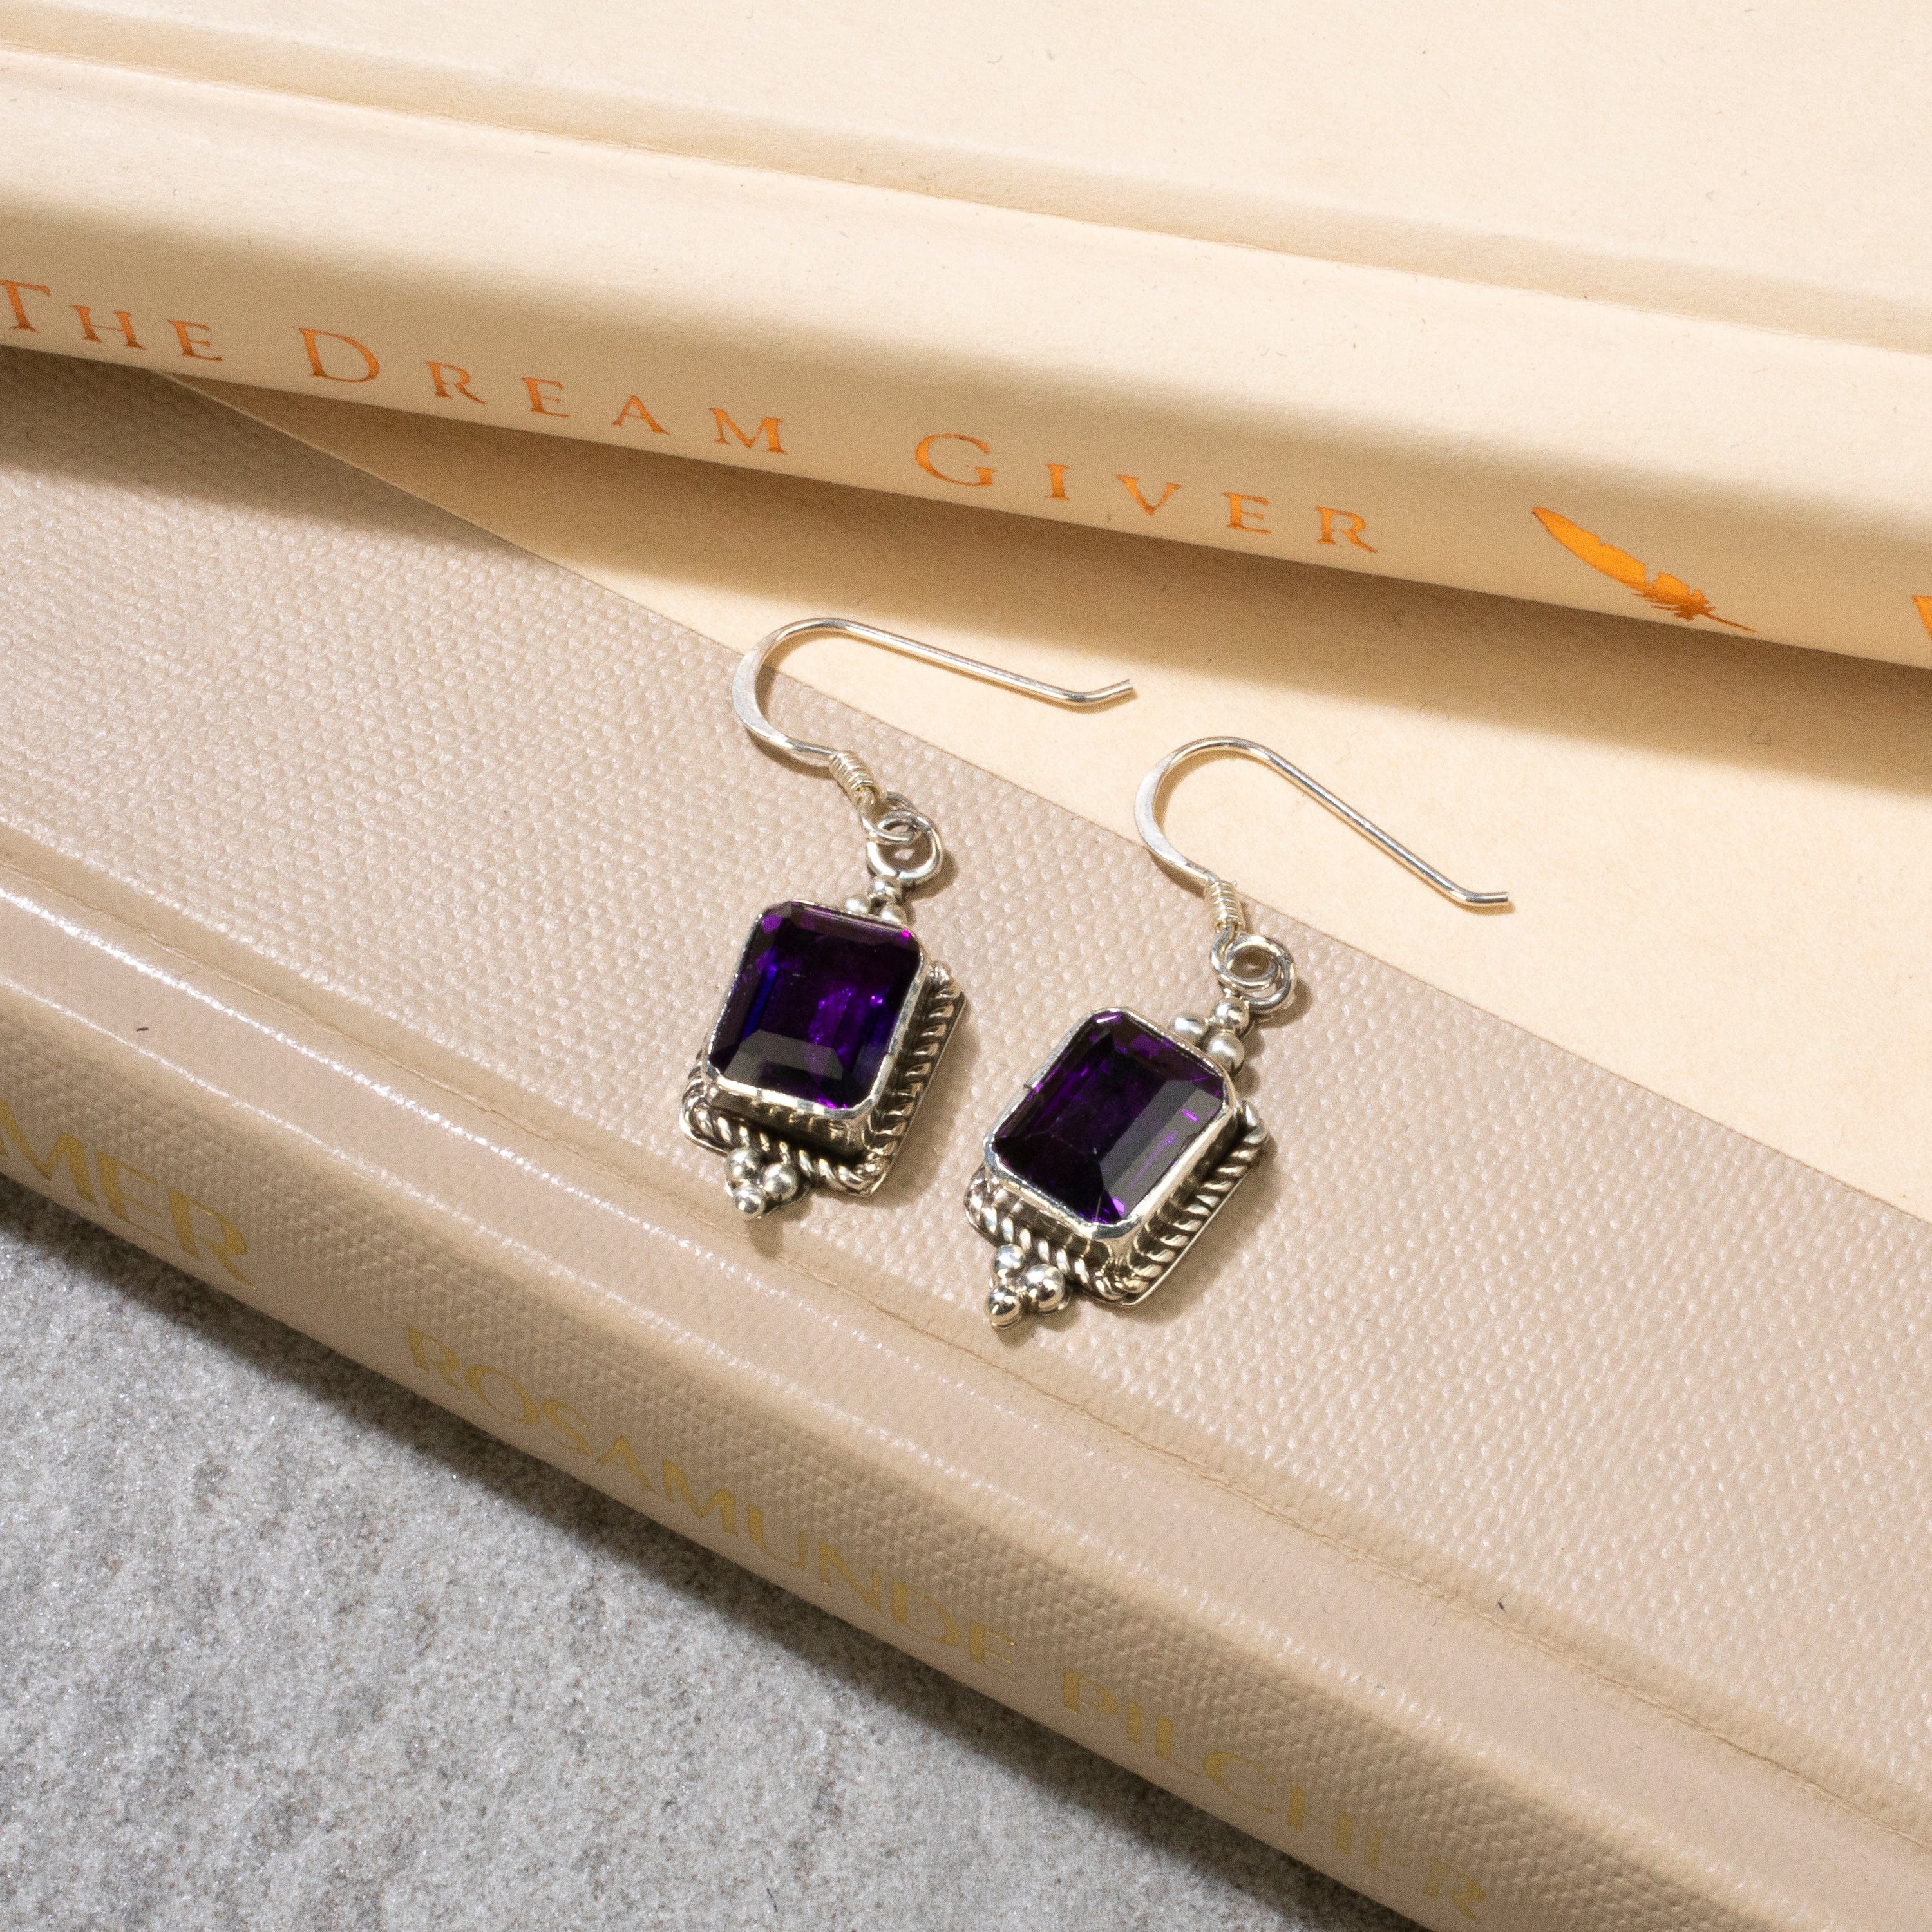 Kalifano Native American Jewelry D. Touchine Amethyst Square Navajo USA Native American Made 925 Sterling Silver Earrings with French Hook NAE600.021